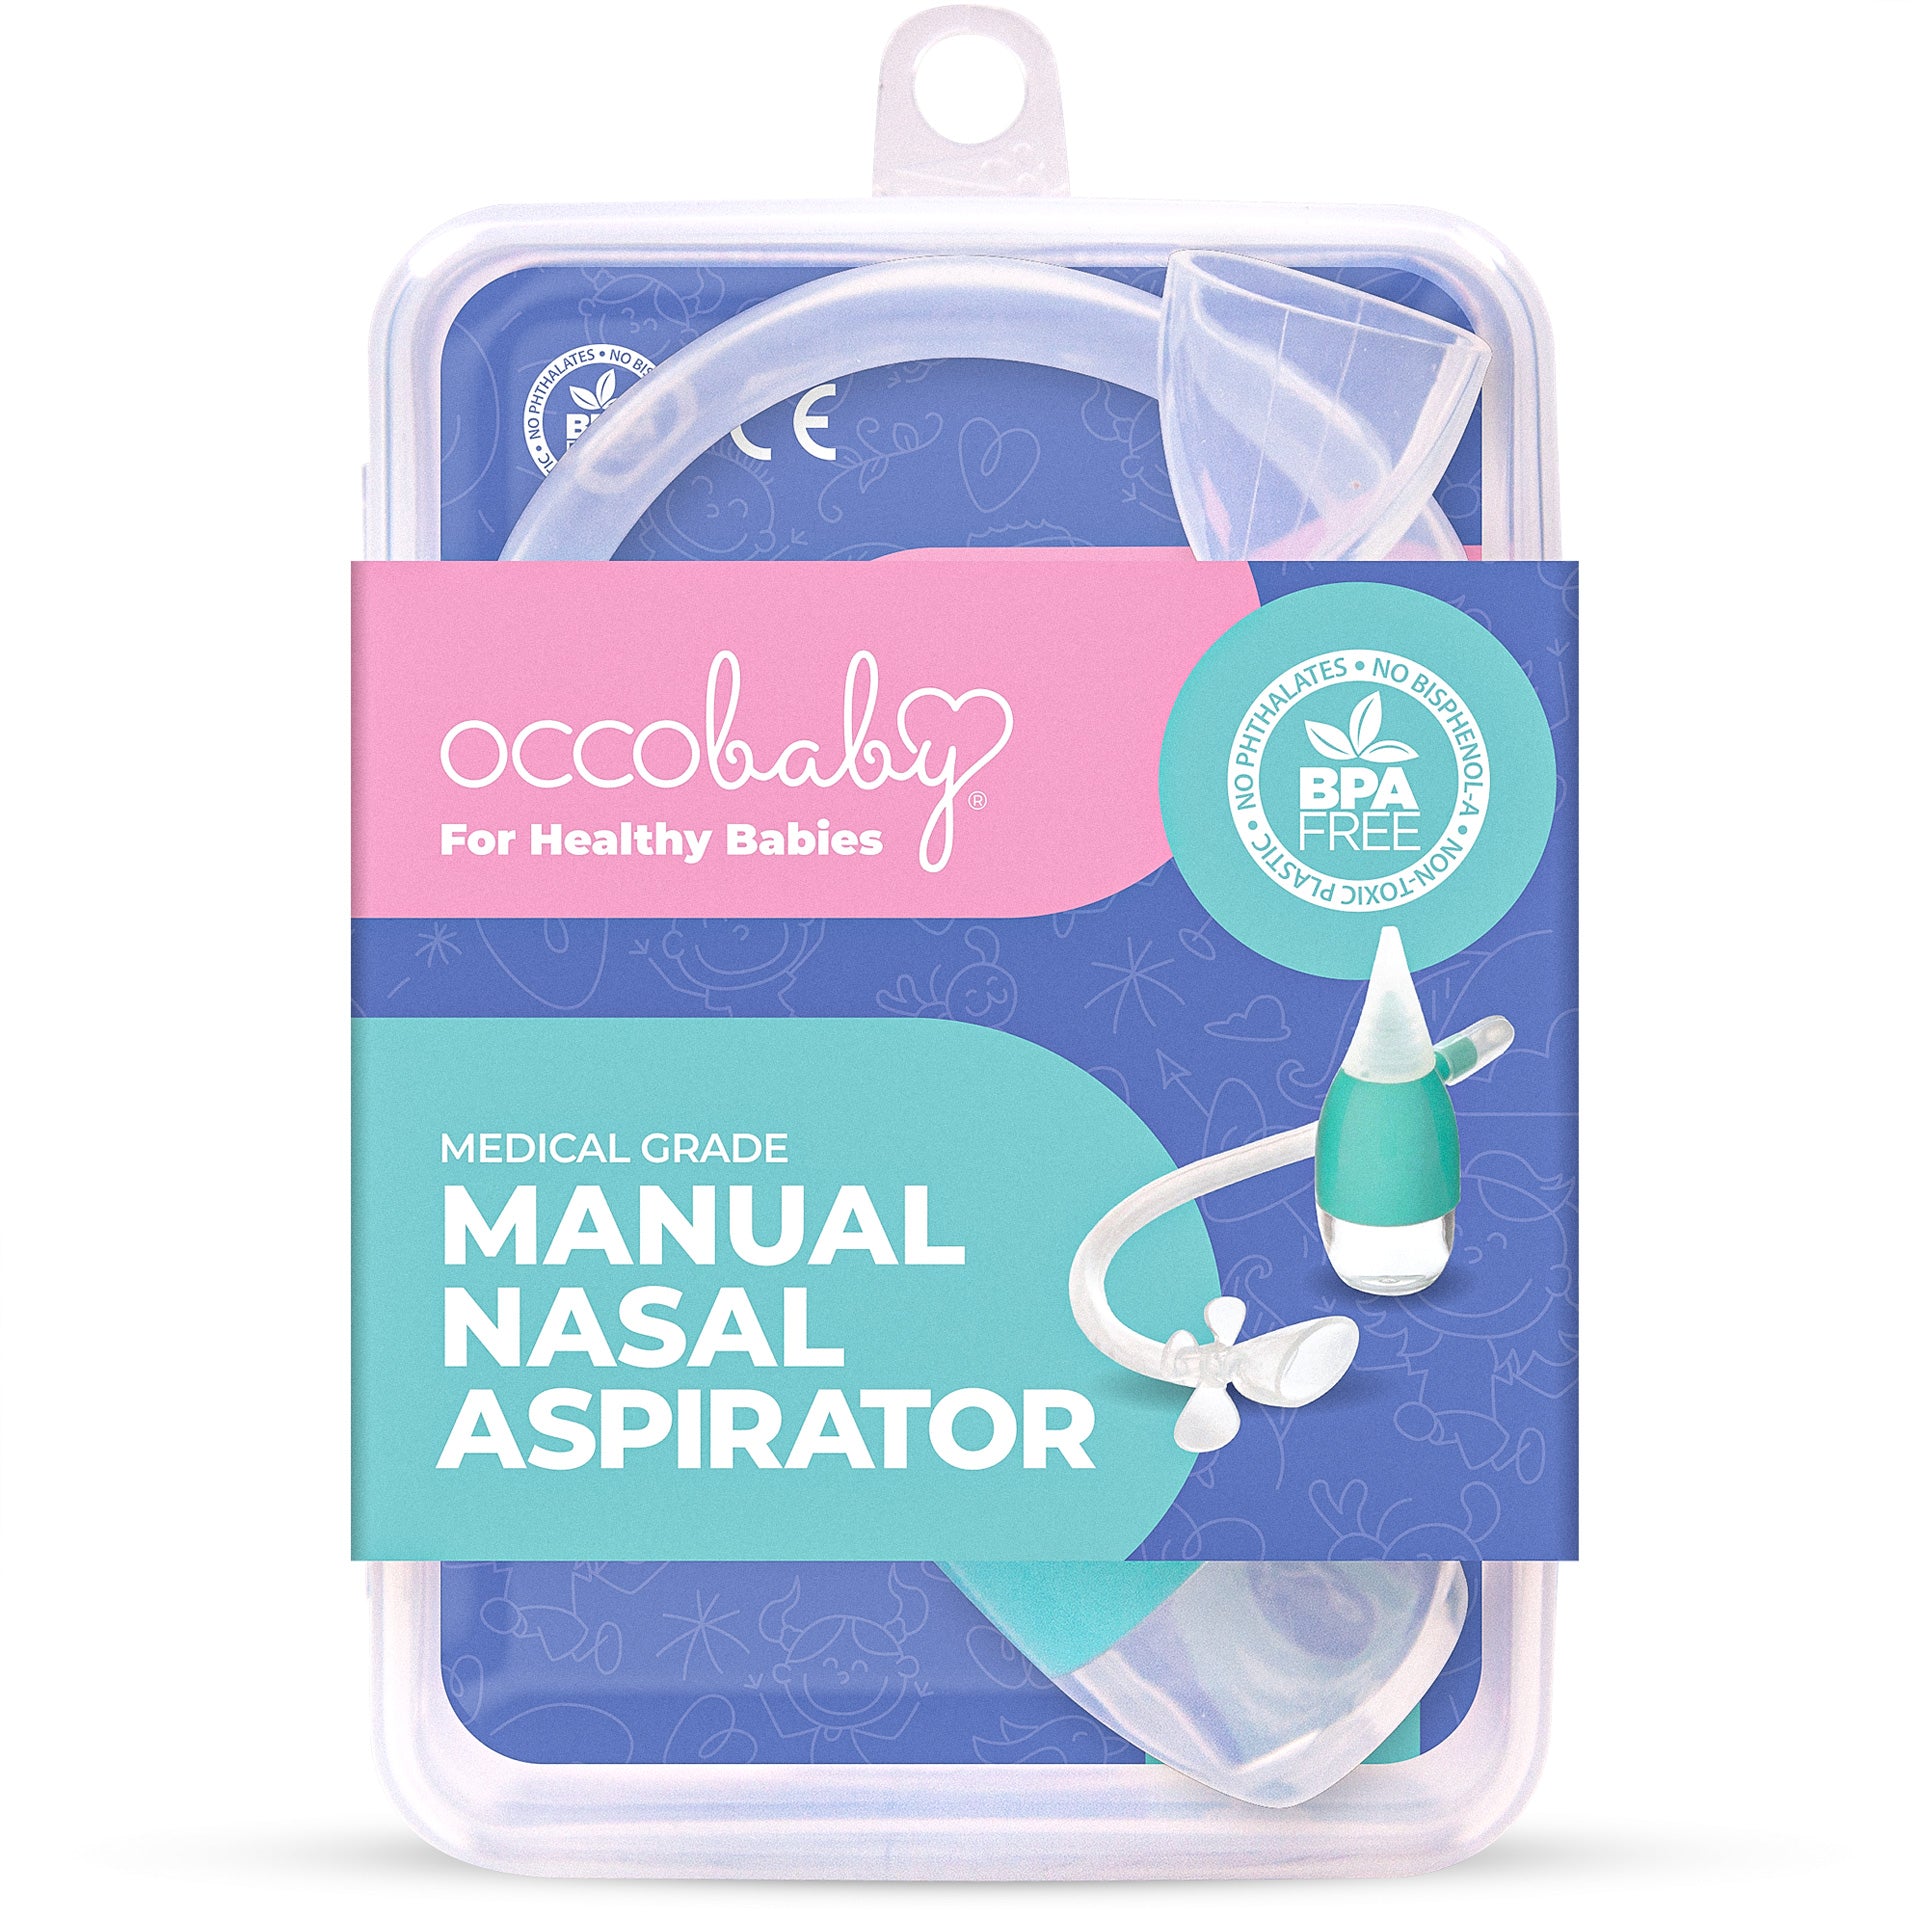 OCCObaby Baby Nasal Aspirator Packaging Design by Scott Luscombe Creatibly